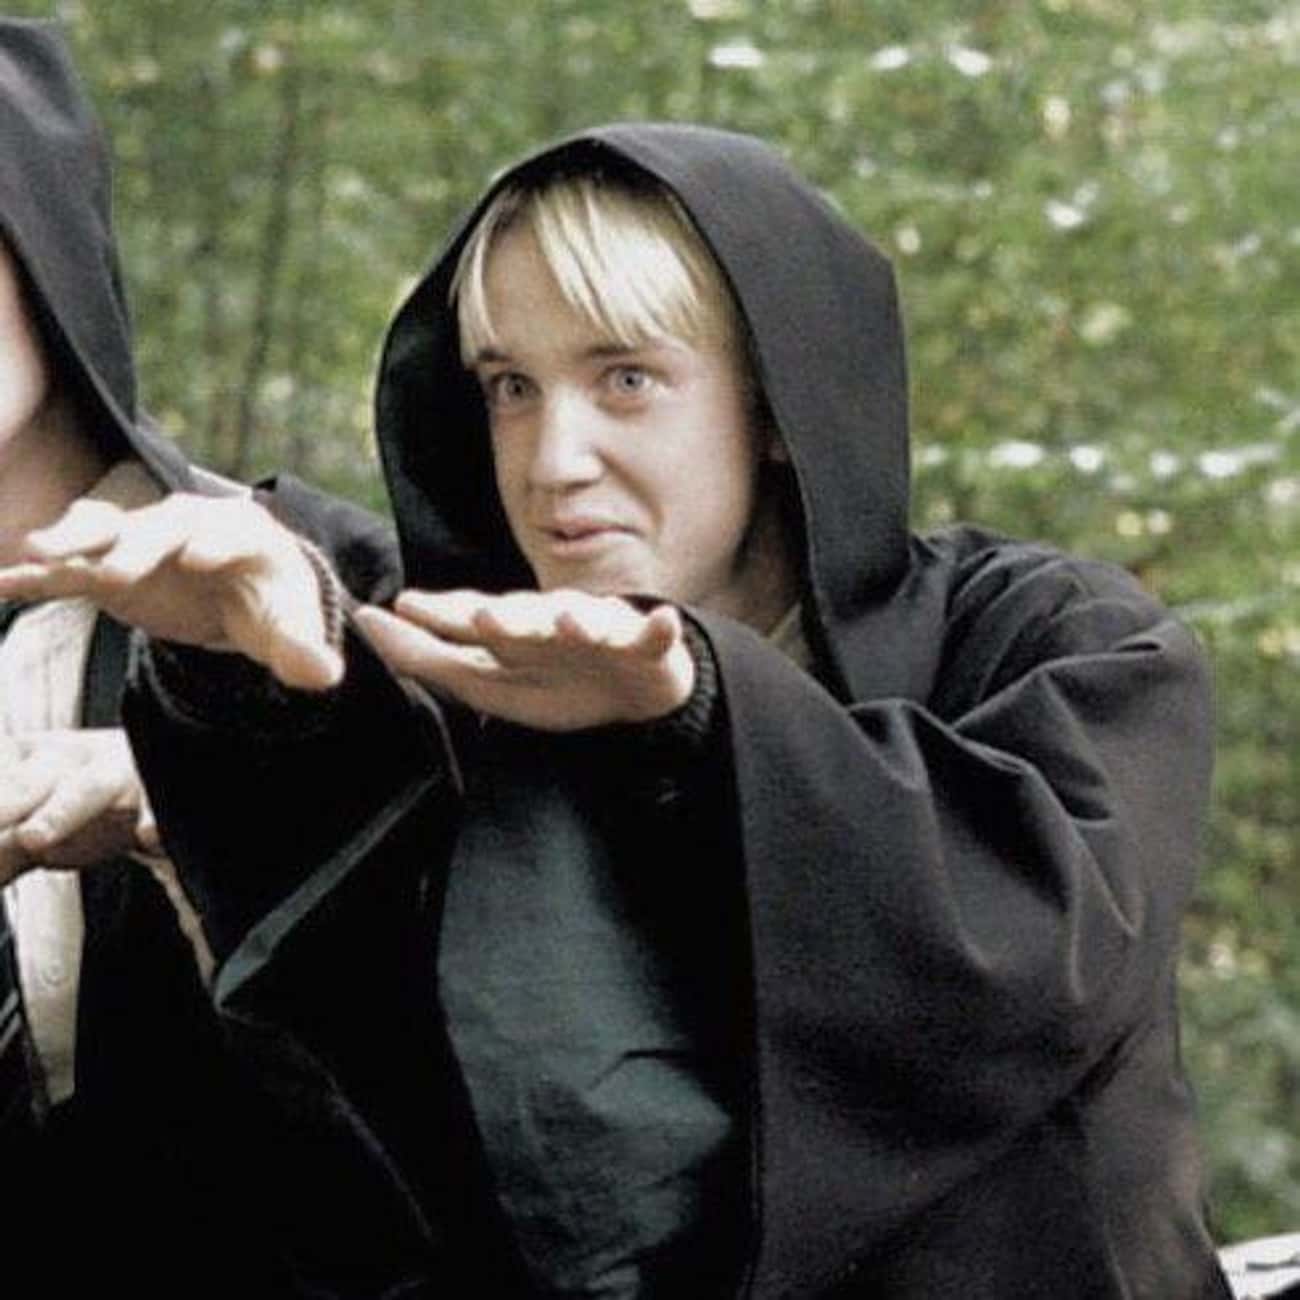 Malfoy Dresses As A Dementor To Disrupt A Quidditch Game